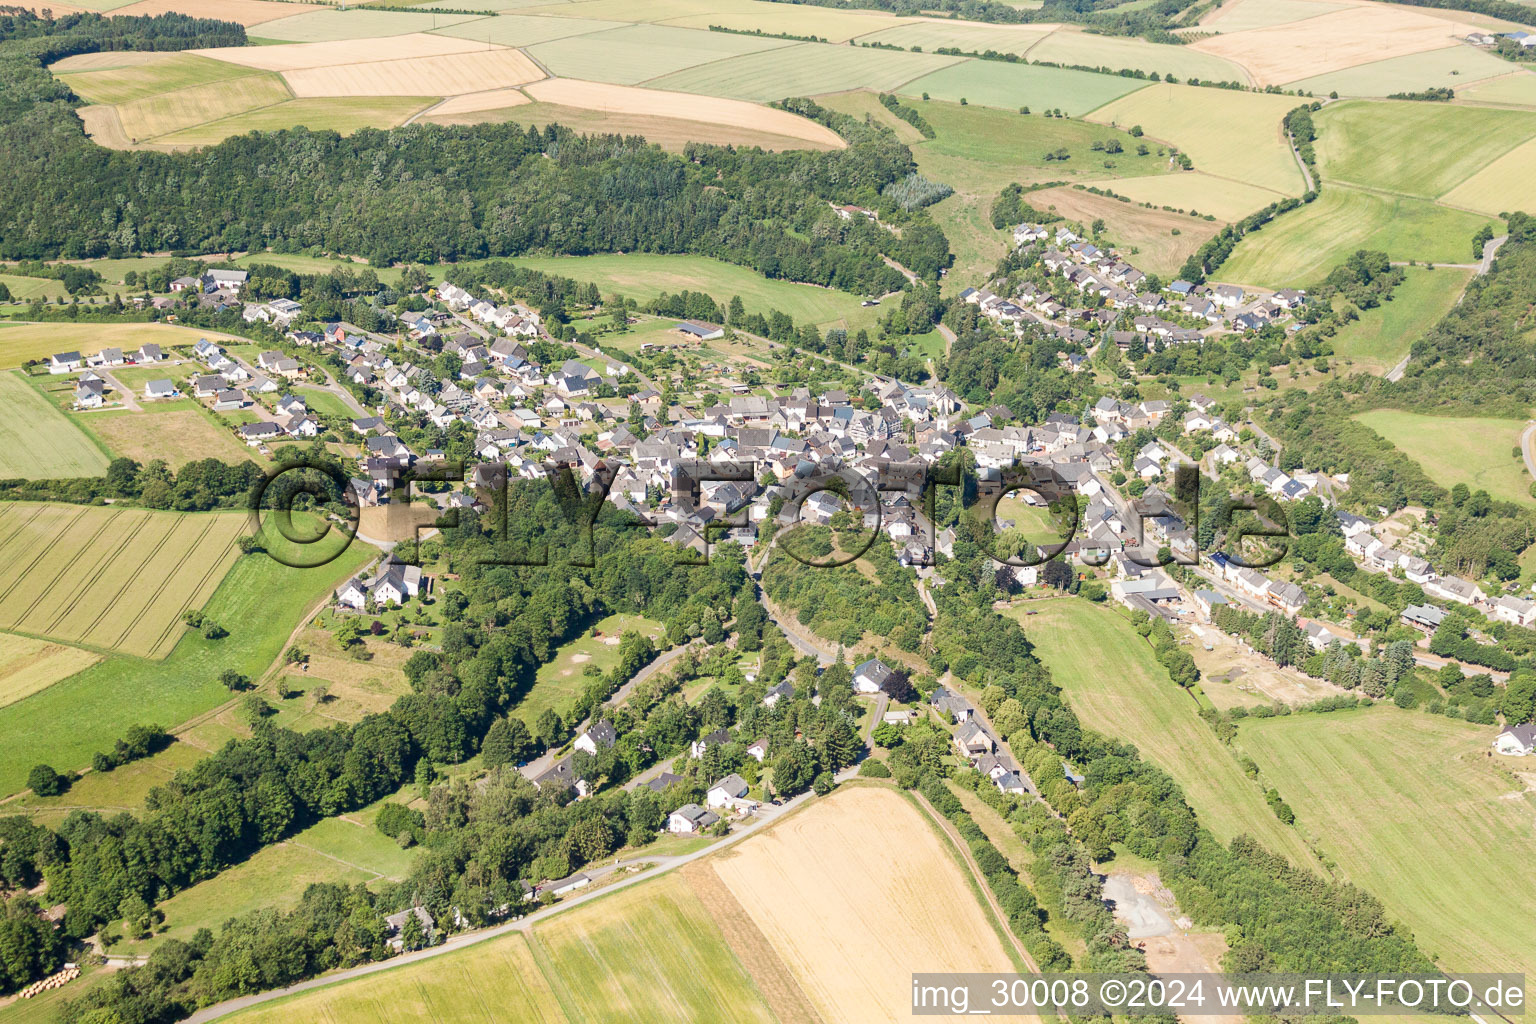 Village - view on the edge of agricultural fields and farmland in Mengerschied in the state Rhineland-Palatinate, Germany